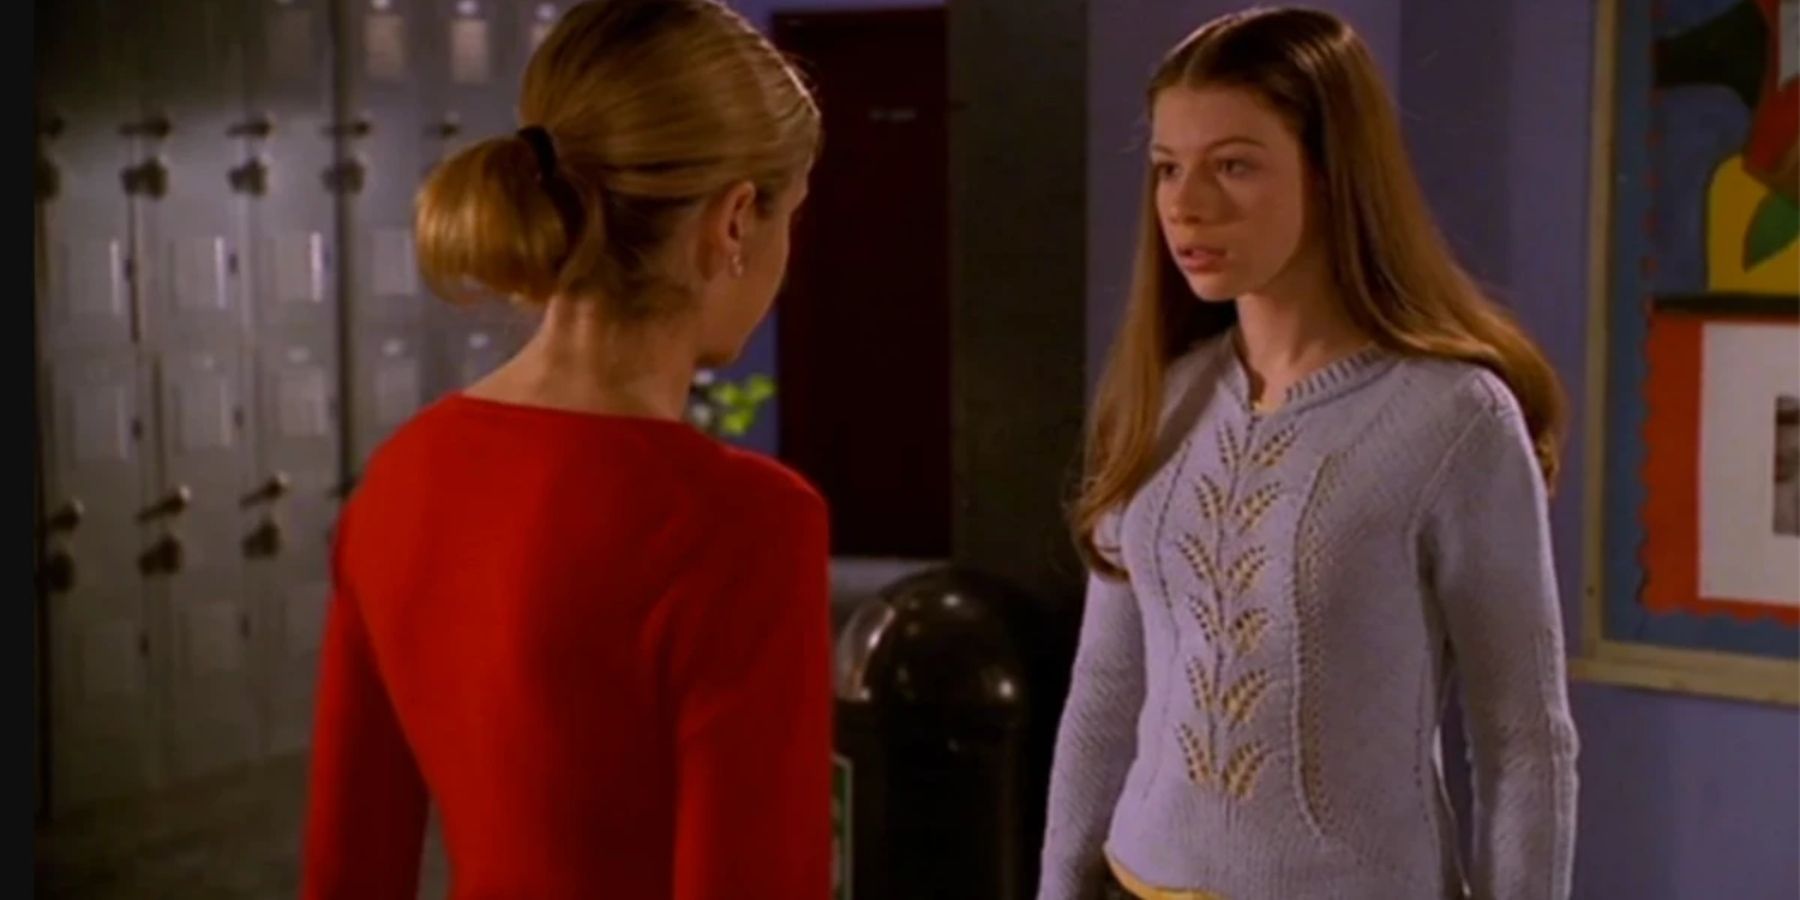 Buffy Summers (Sarah Michelle Gellar) and Dawn Summers (Michelle Trachtenberg) in Buffy The Vampire Slayer